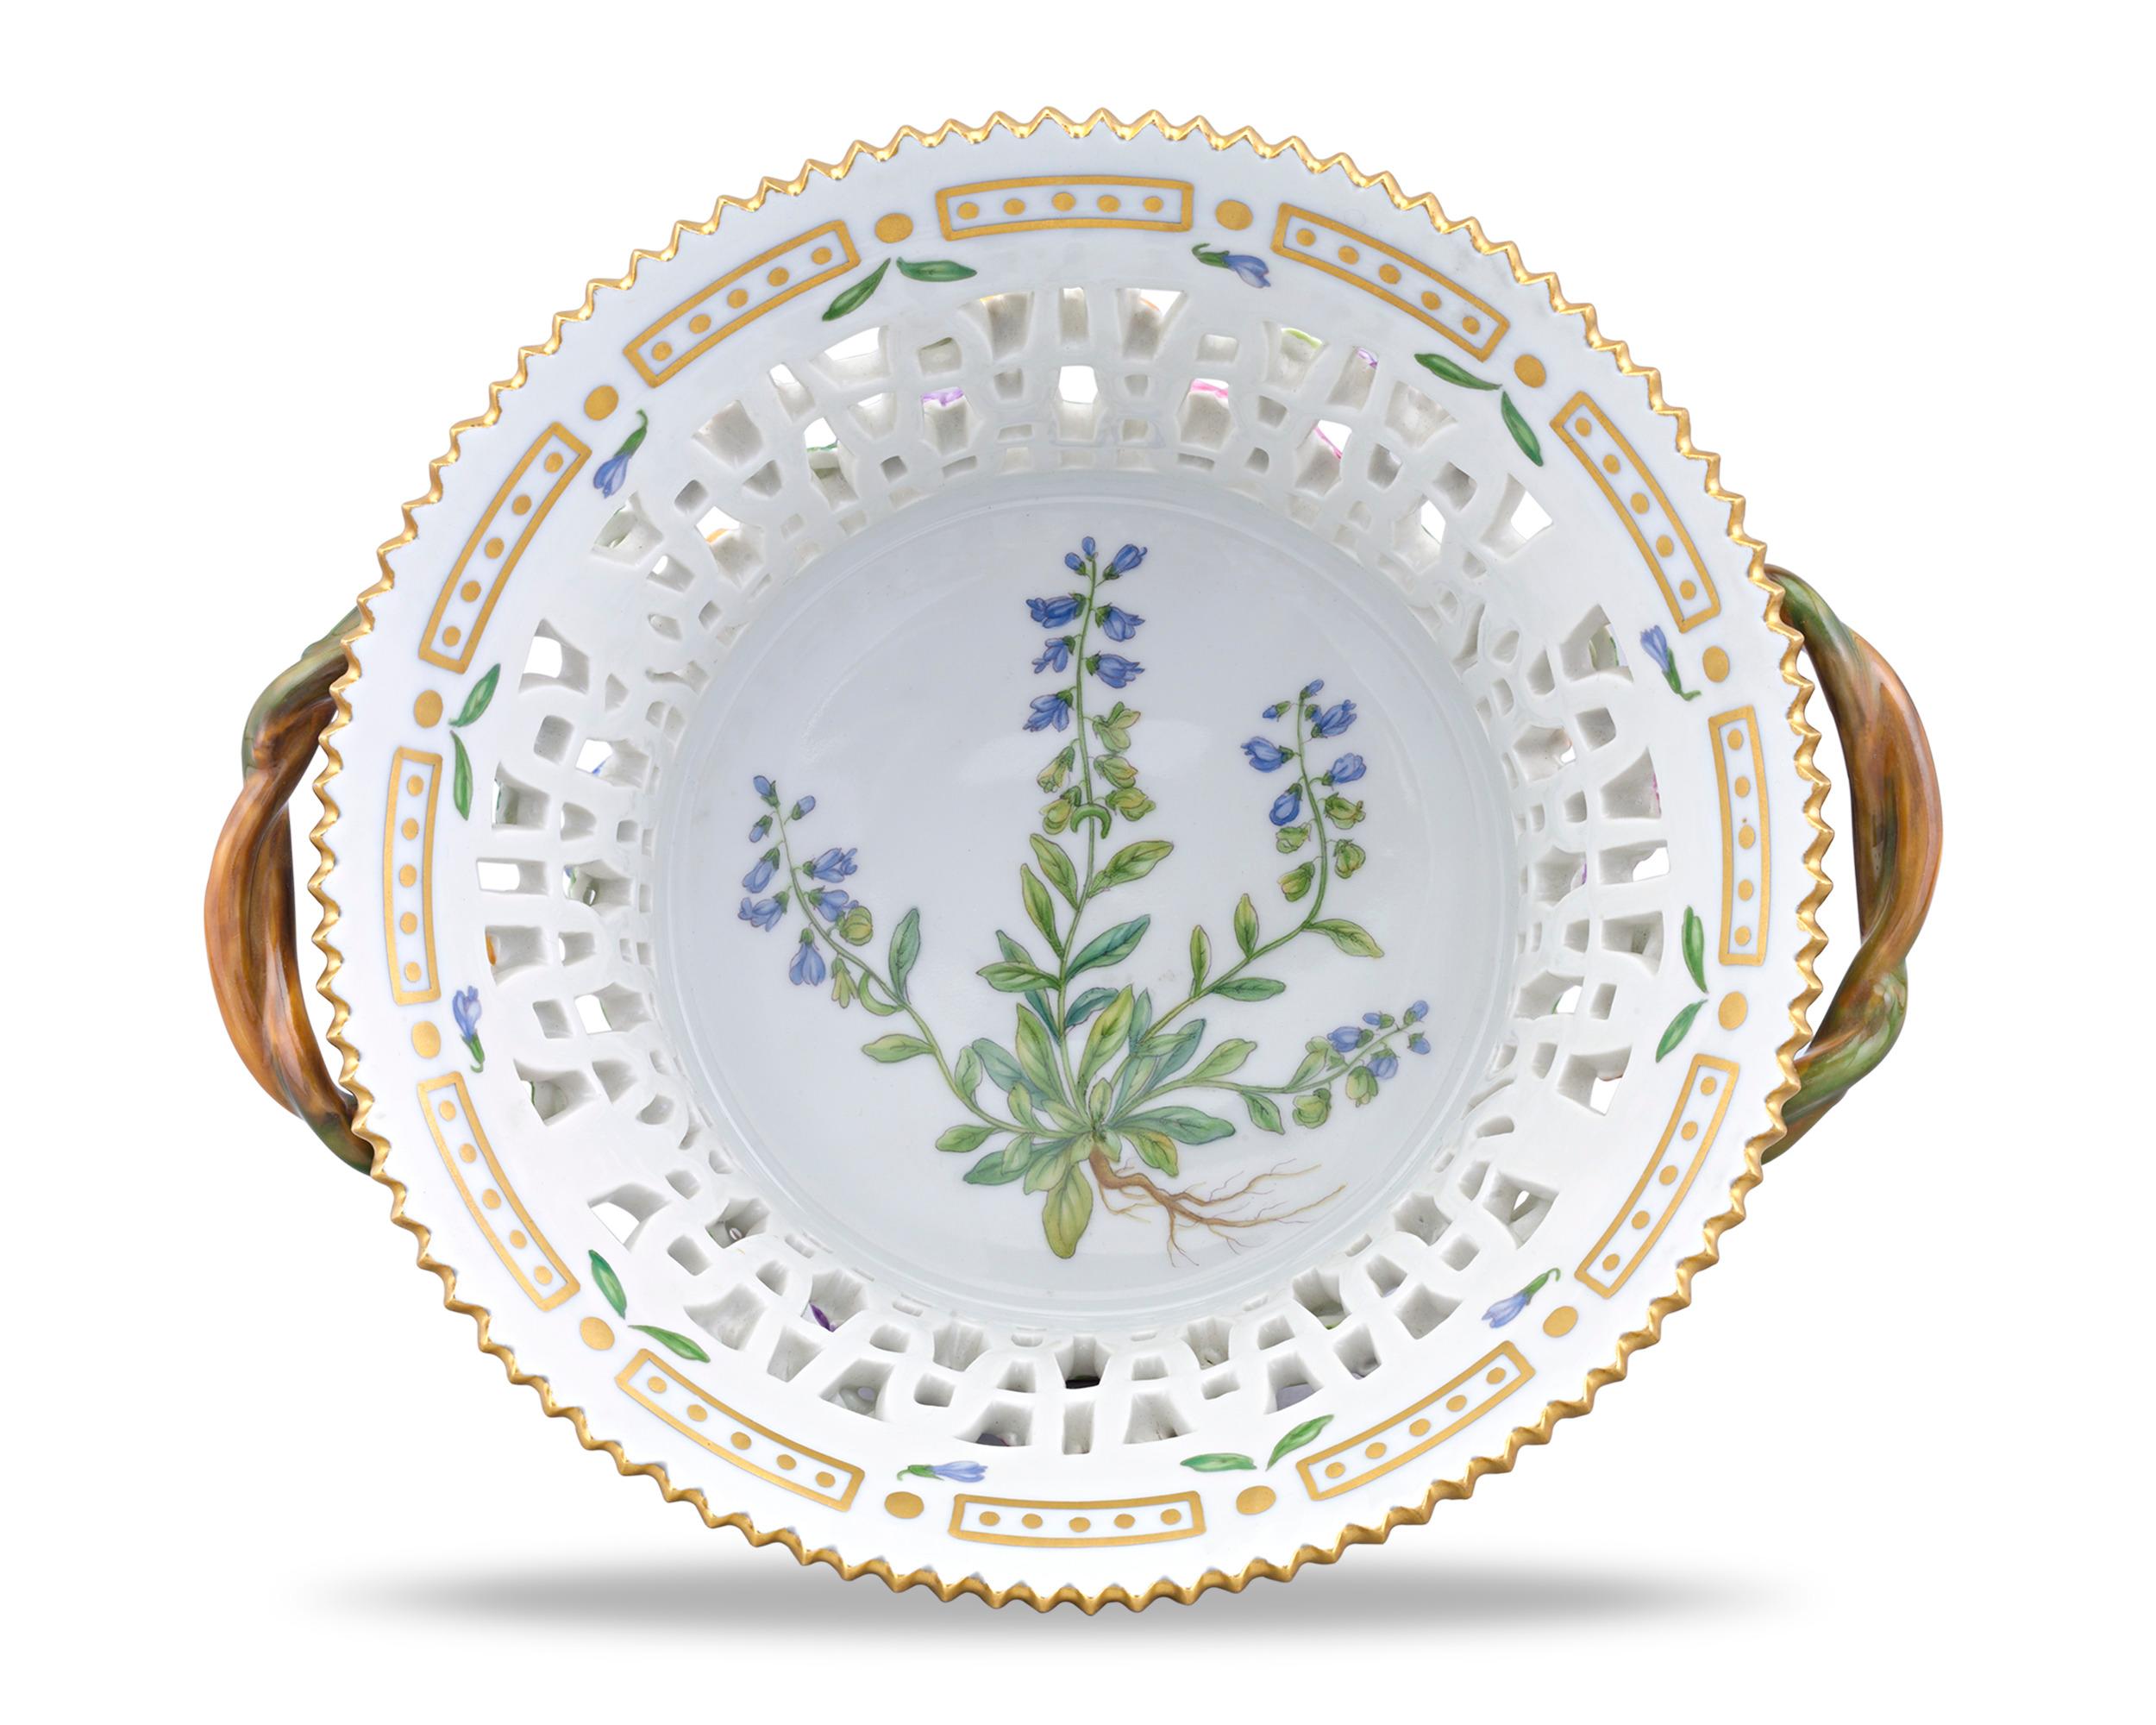 A delicate floral motif encases this rare pierced porcelain basket by the celebrated Royal Copenhagen. Crafted in the highly celebrated Flora Danica motif, the service dish features the Polygala Amarum, or bitter milkwort, depicted with